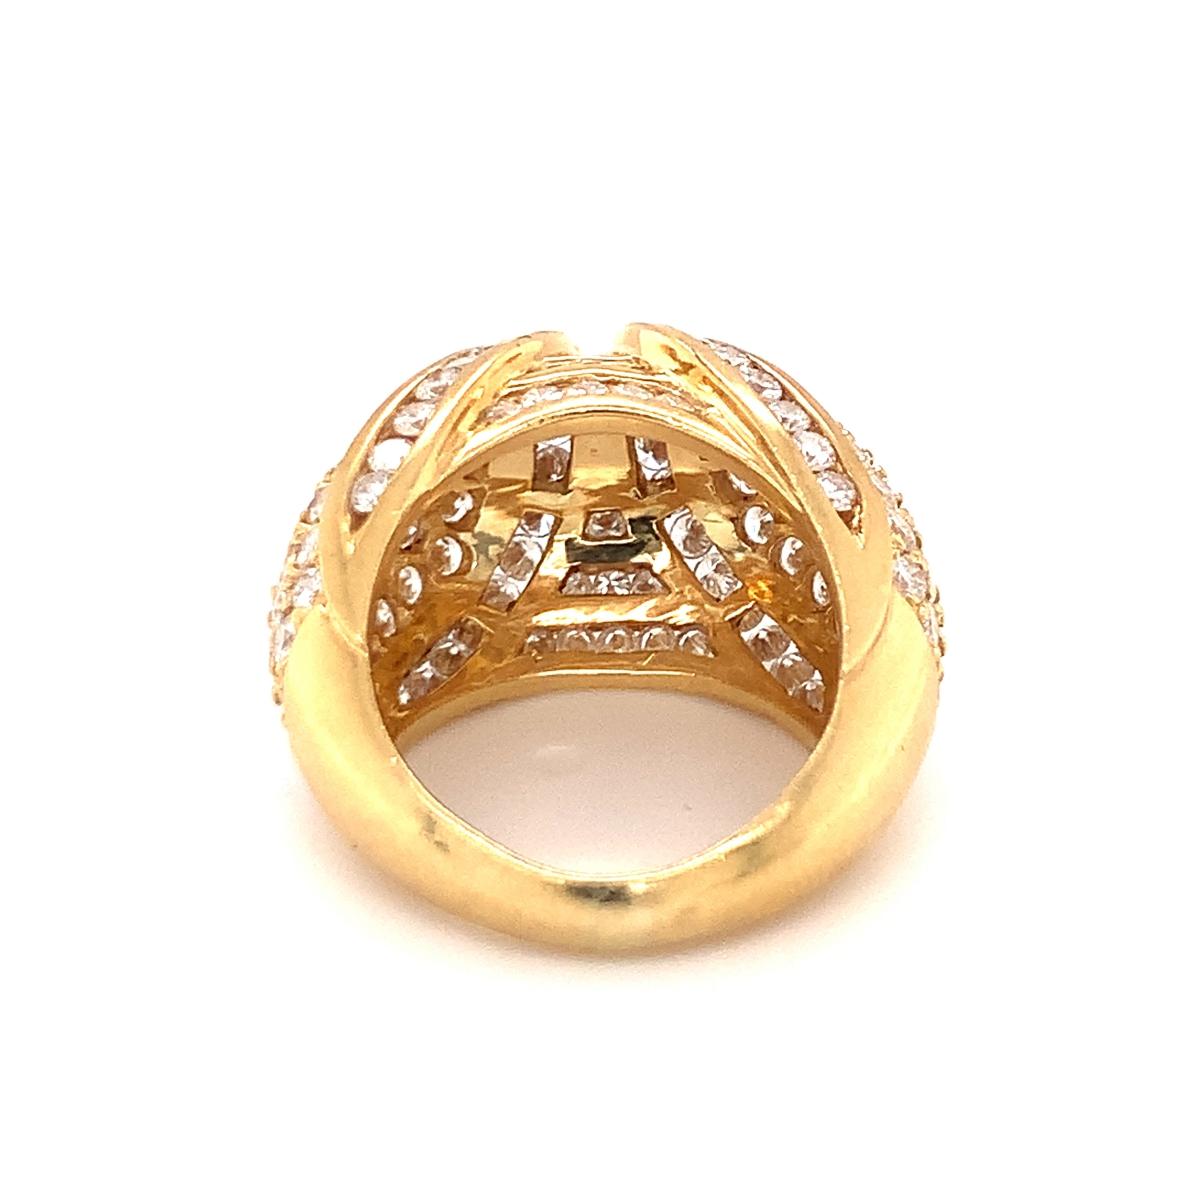 Women's Pave Diamond Dome 18K Yellow Gold Ring, circa 1970s For Sale